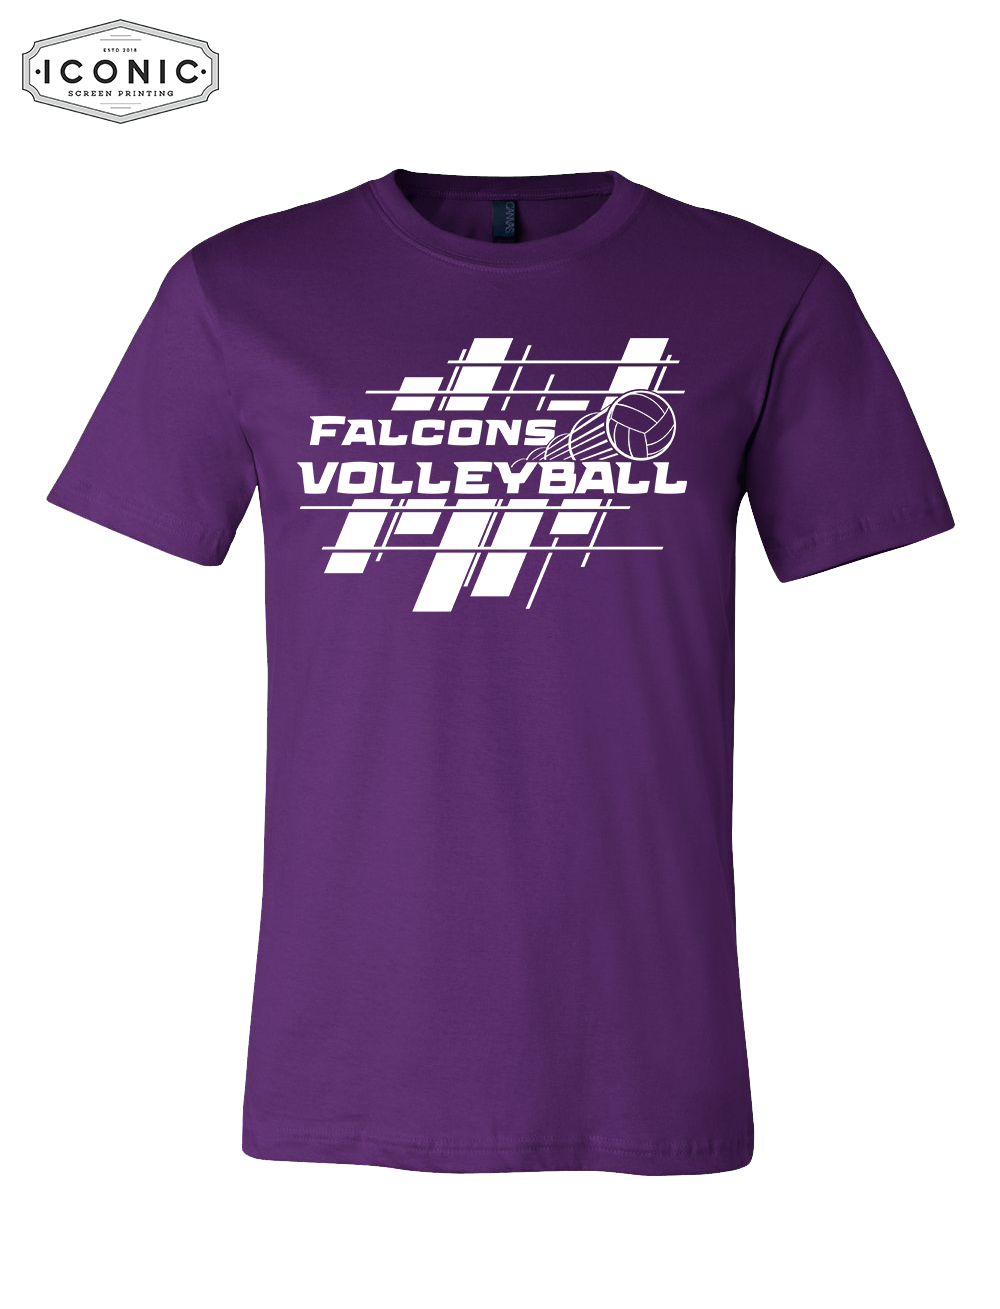 Falcons VolleyBall - Unisex Jersey Tee